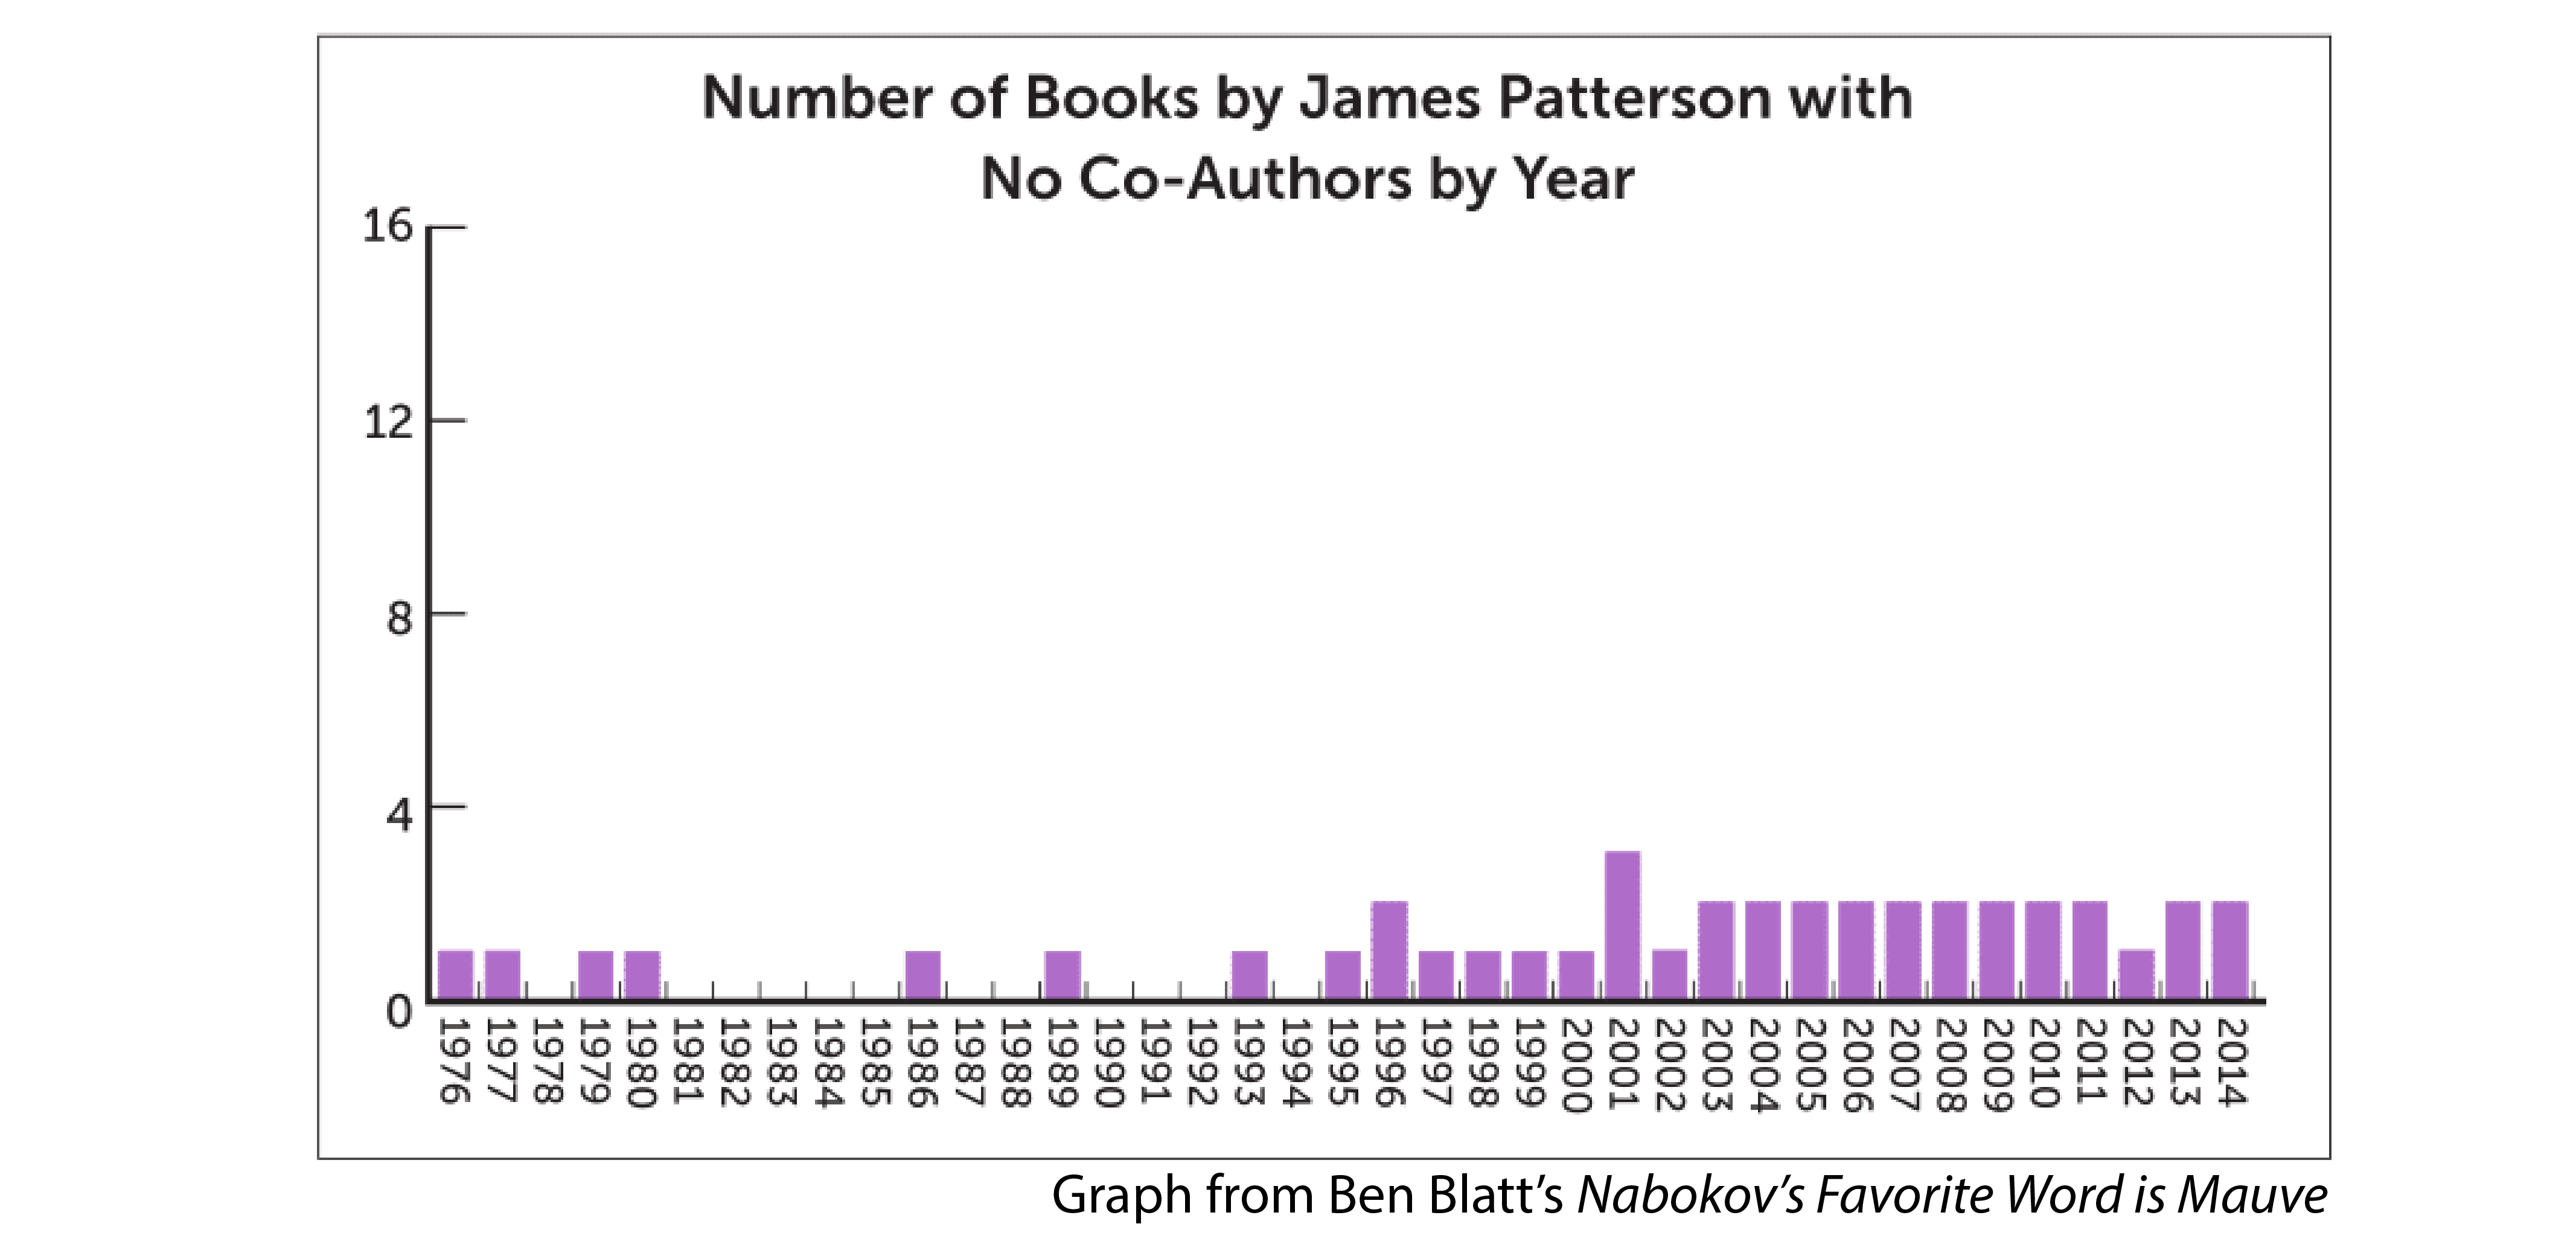 A graph: Number of Books by James Patterson with No Co-Authors by Year